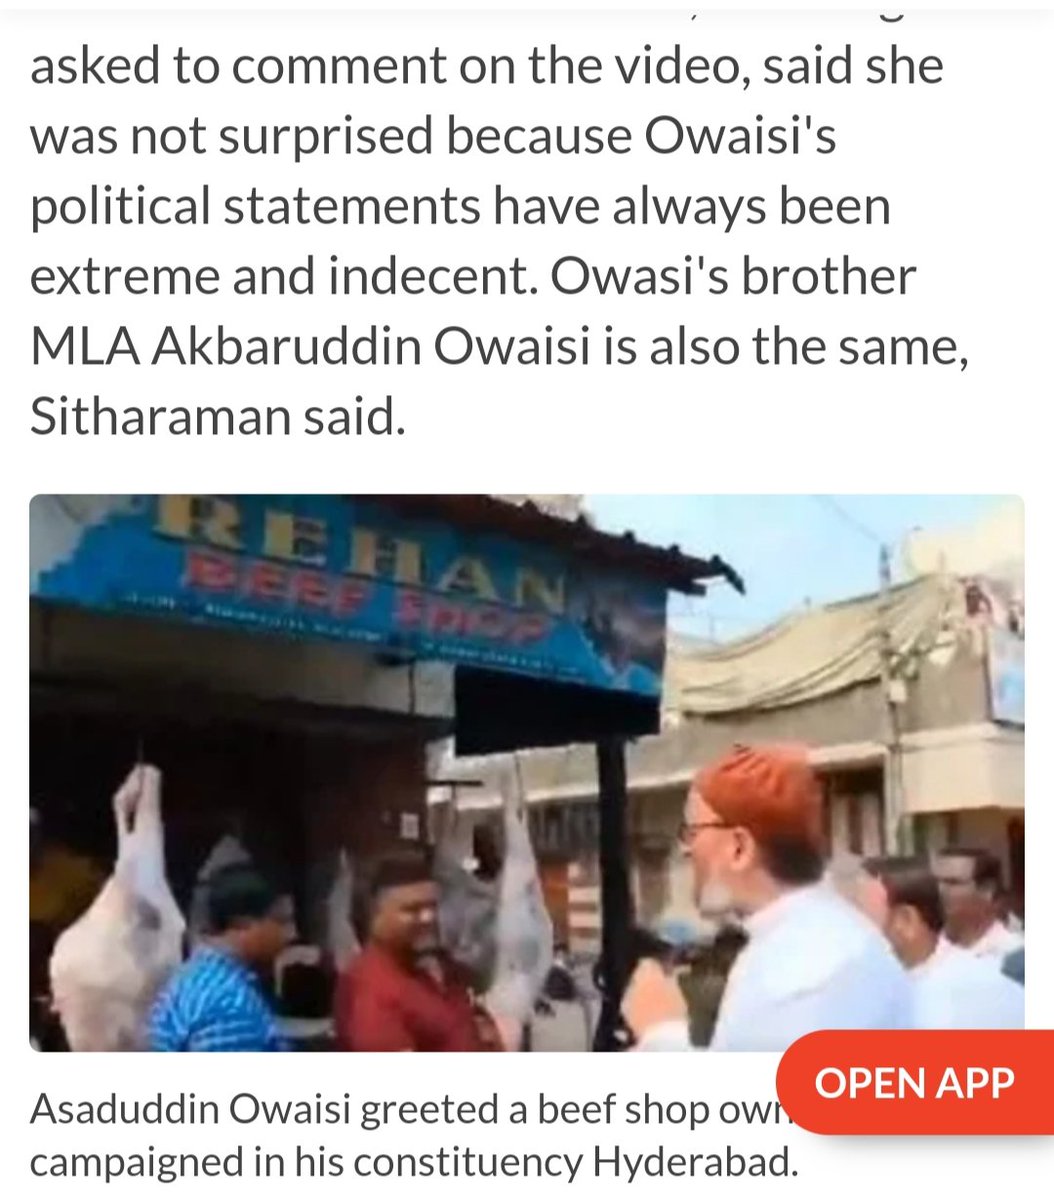 @indiatvnews 
watch your channel great news, disgusting to call owasi on aap ki adalat smiling @RajatSharmaLive after he said 'keep cutting our gaumata' in only Hindu nation, do you hv right to live in India, go to any Muslim nation live there-sick.

@VHPDigital